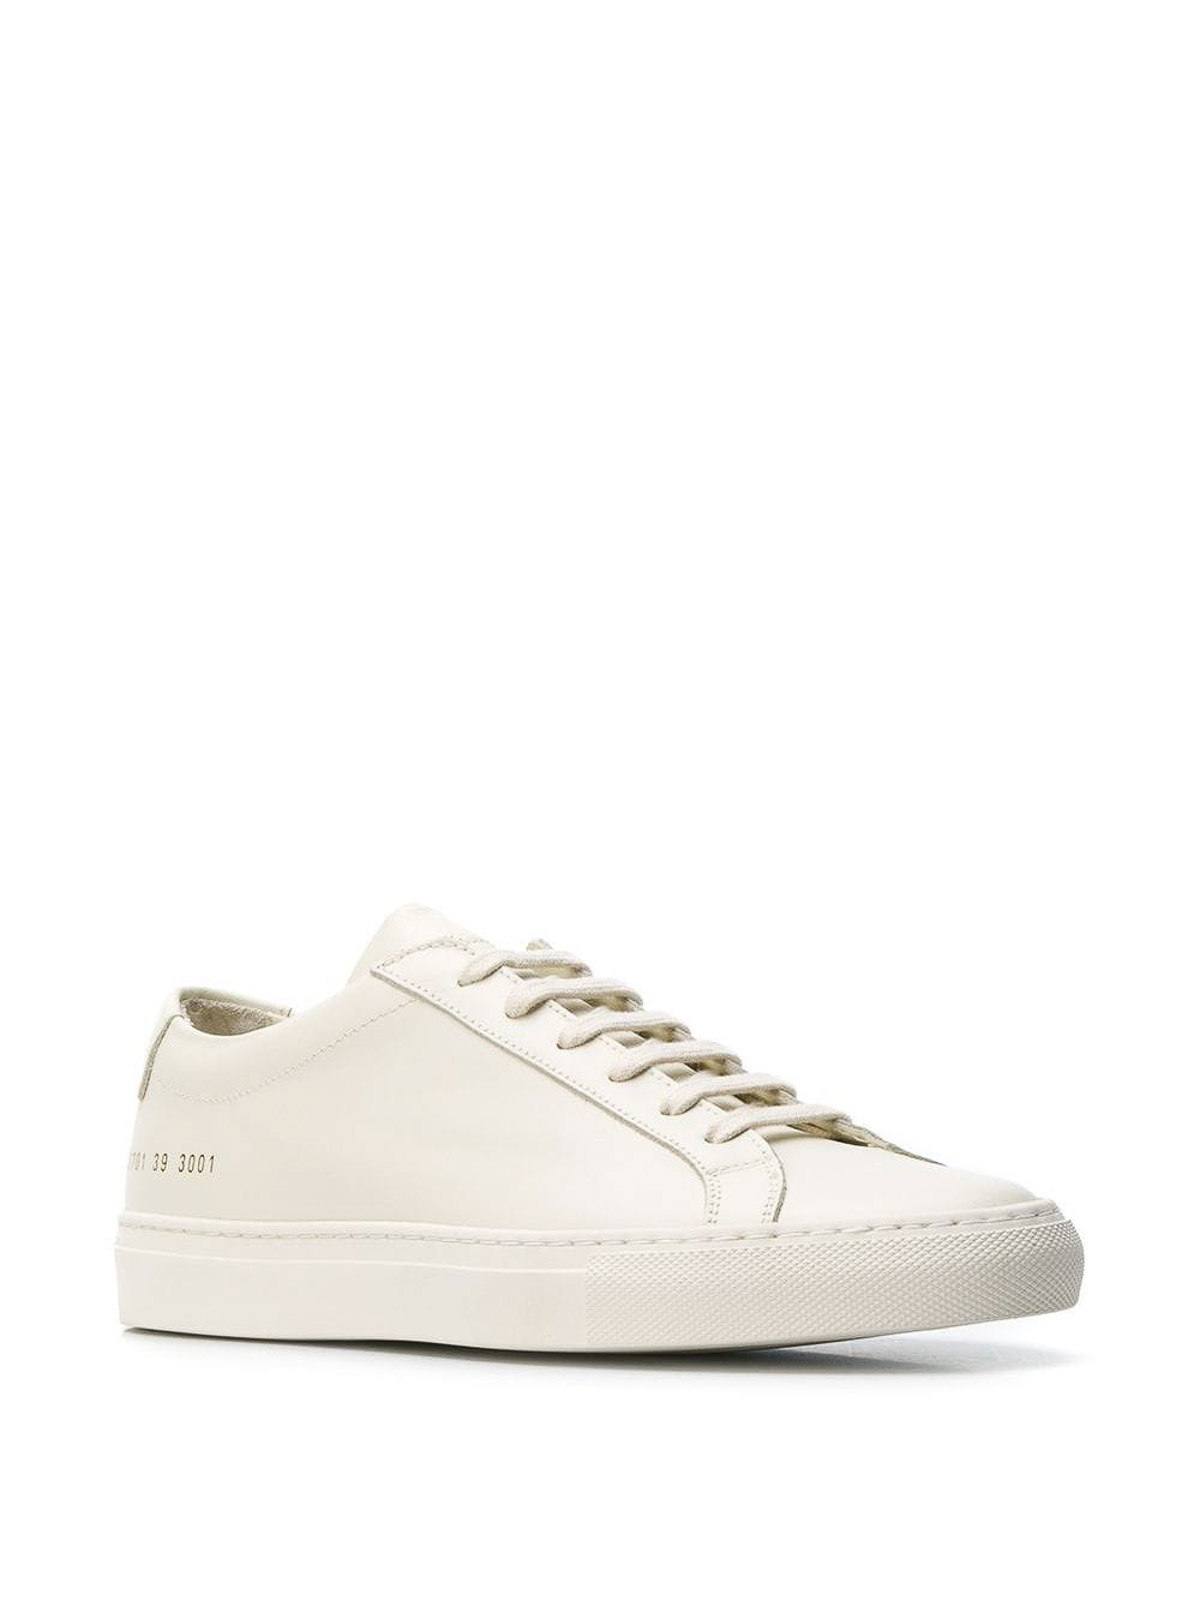 Shop Common Projects Original Achilles Low Leather Sneakers In White